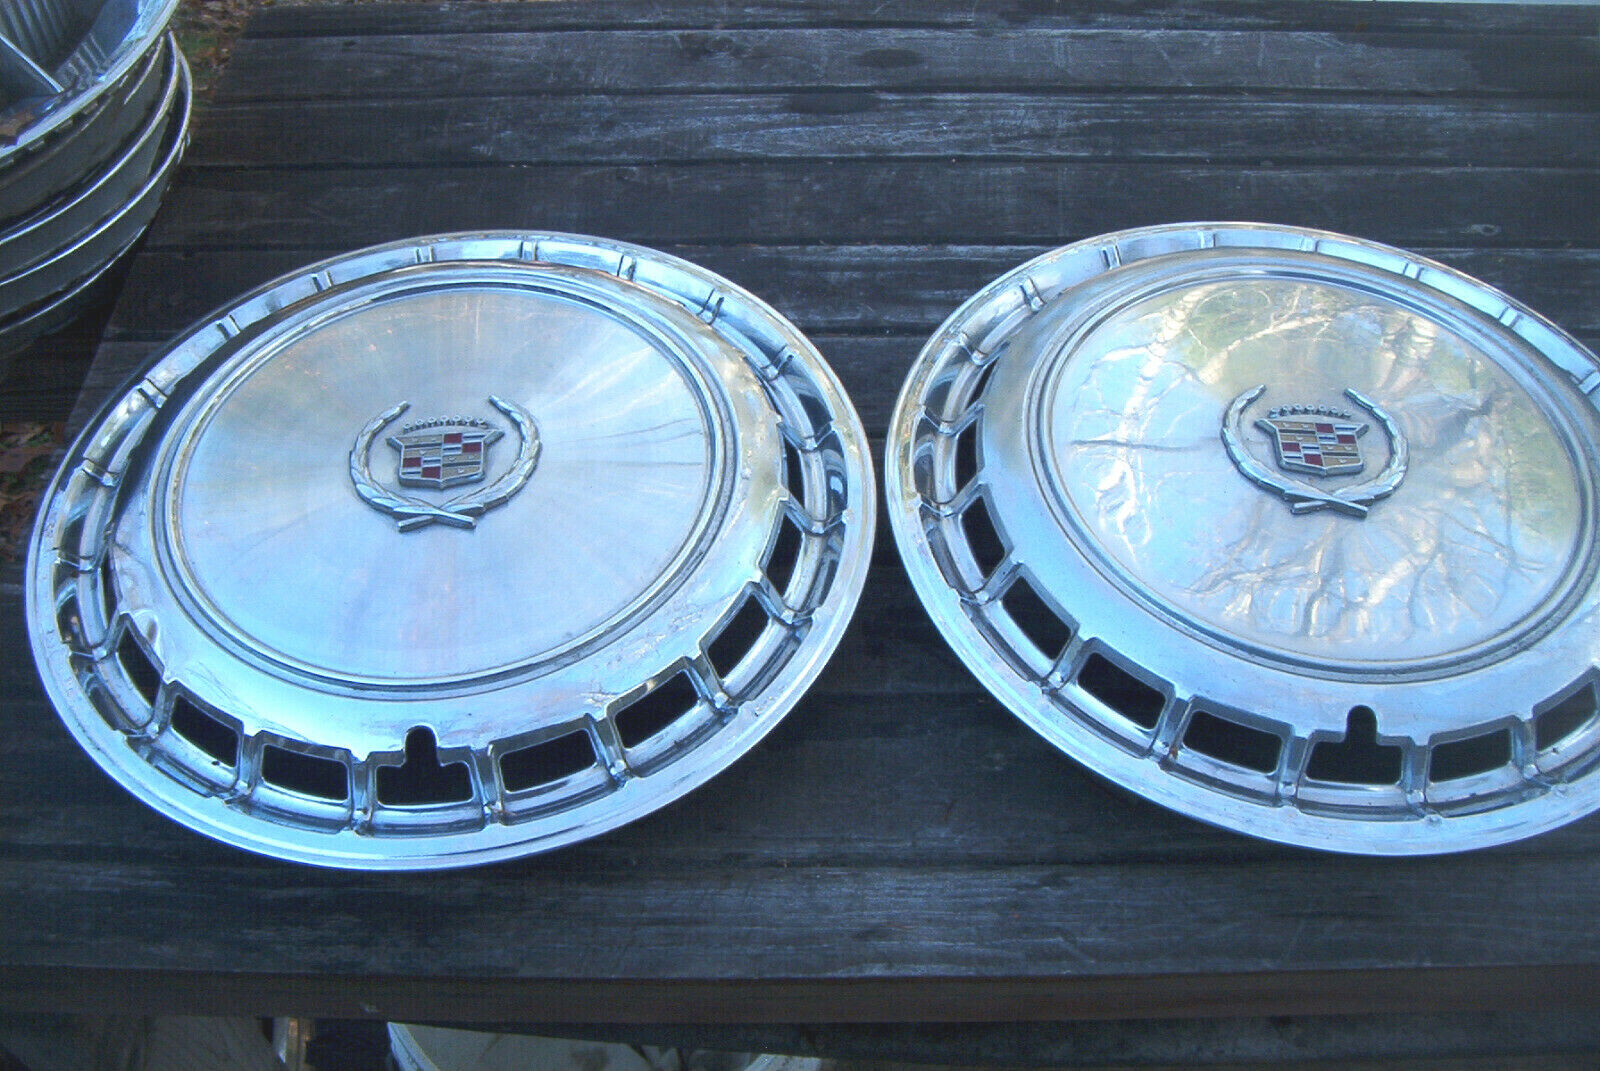 OE vintage pair of 87/88 Cadillac front wheel drive 14 inch wheelcovers # 2051